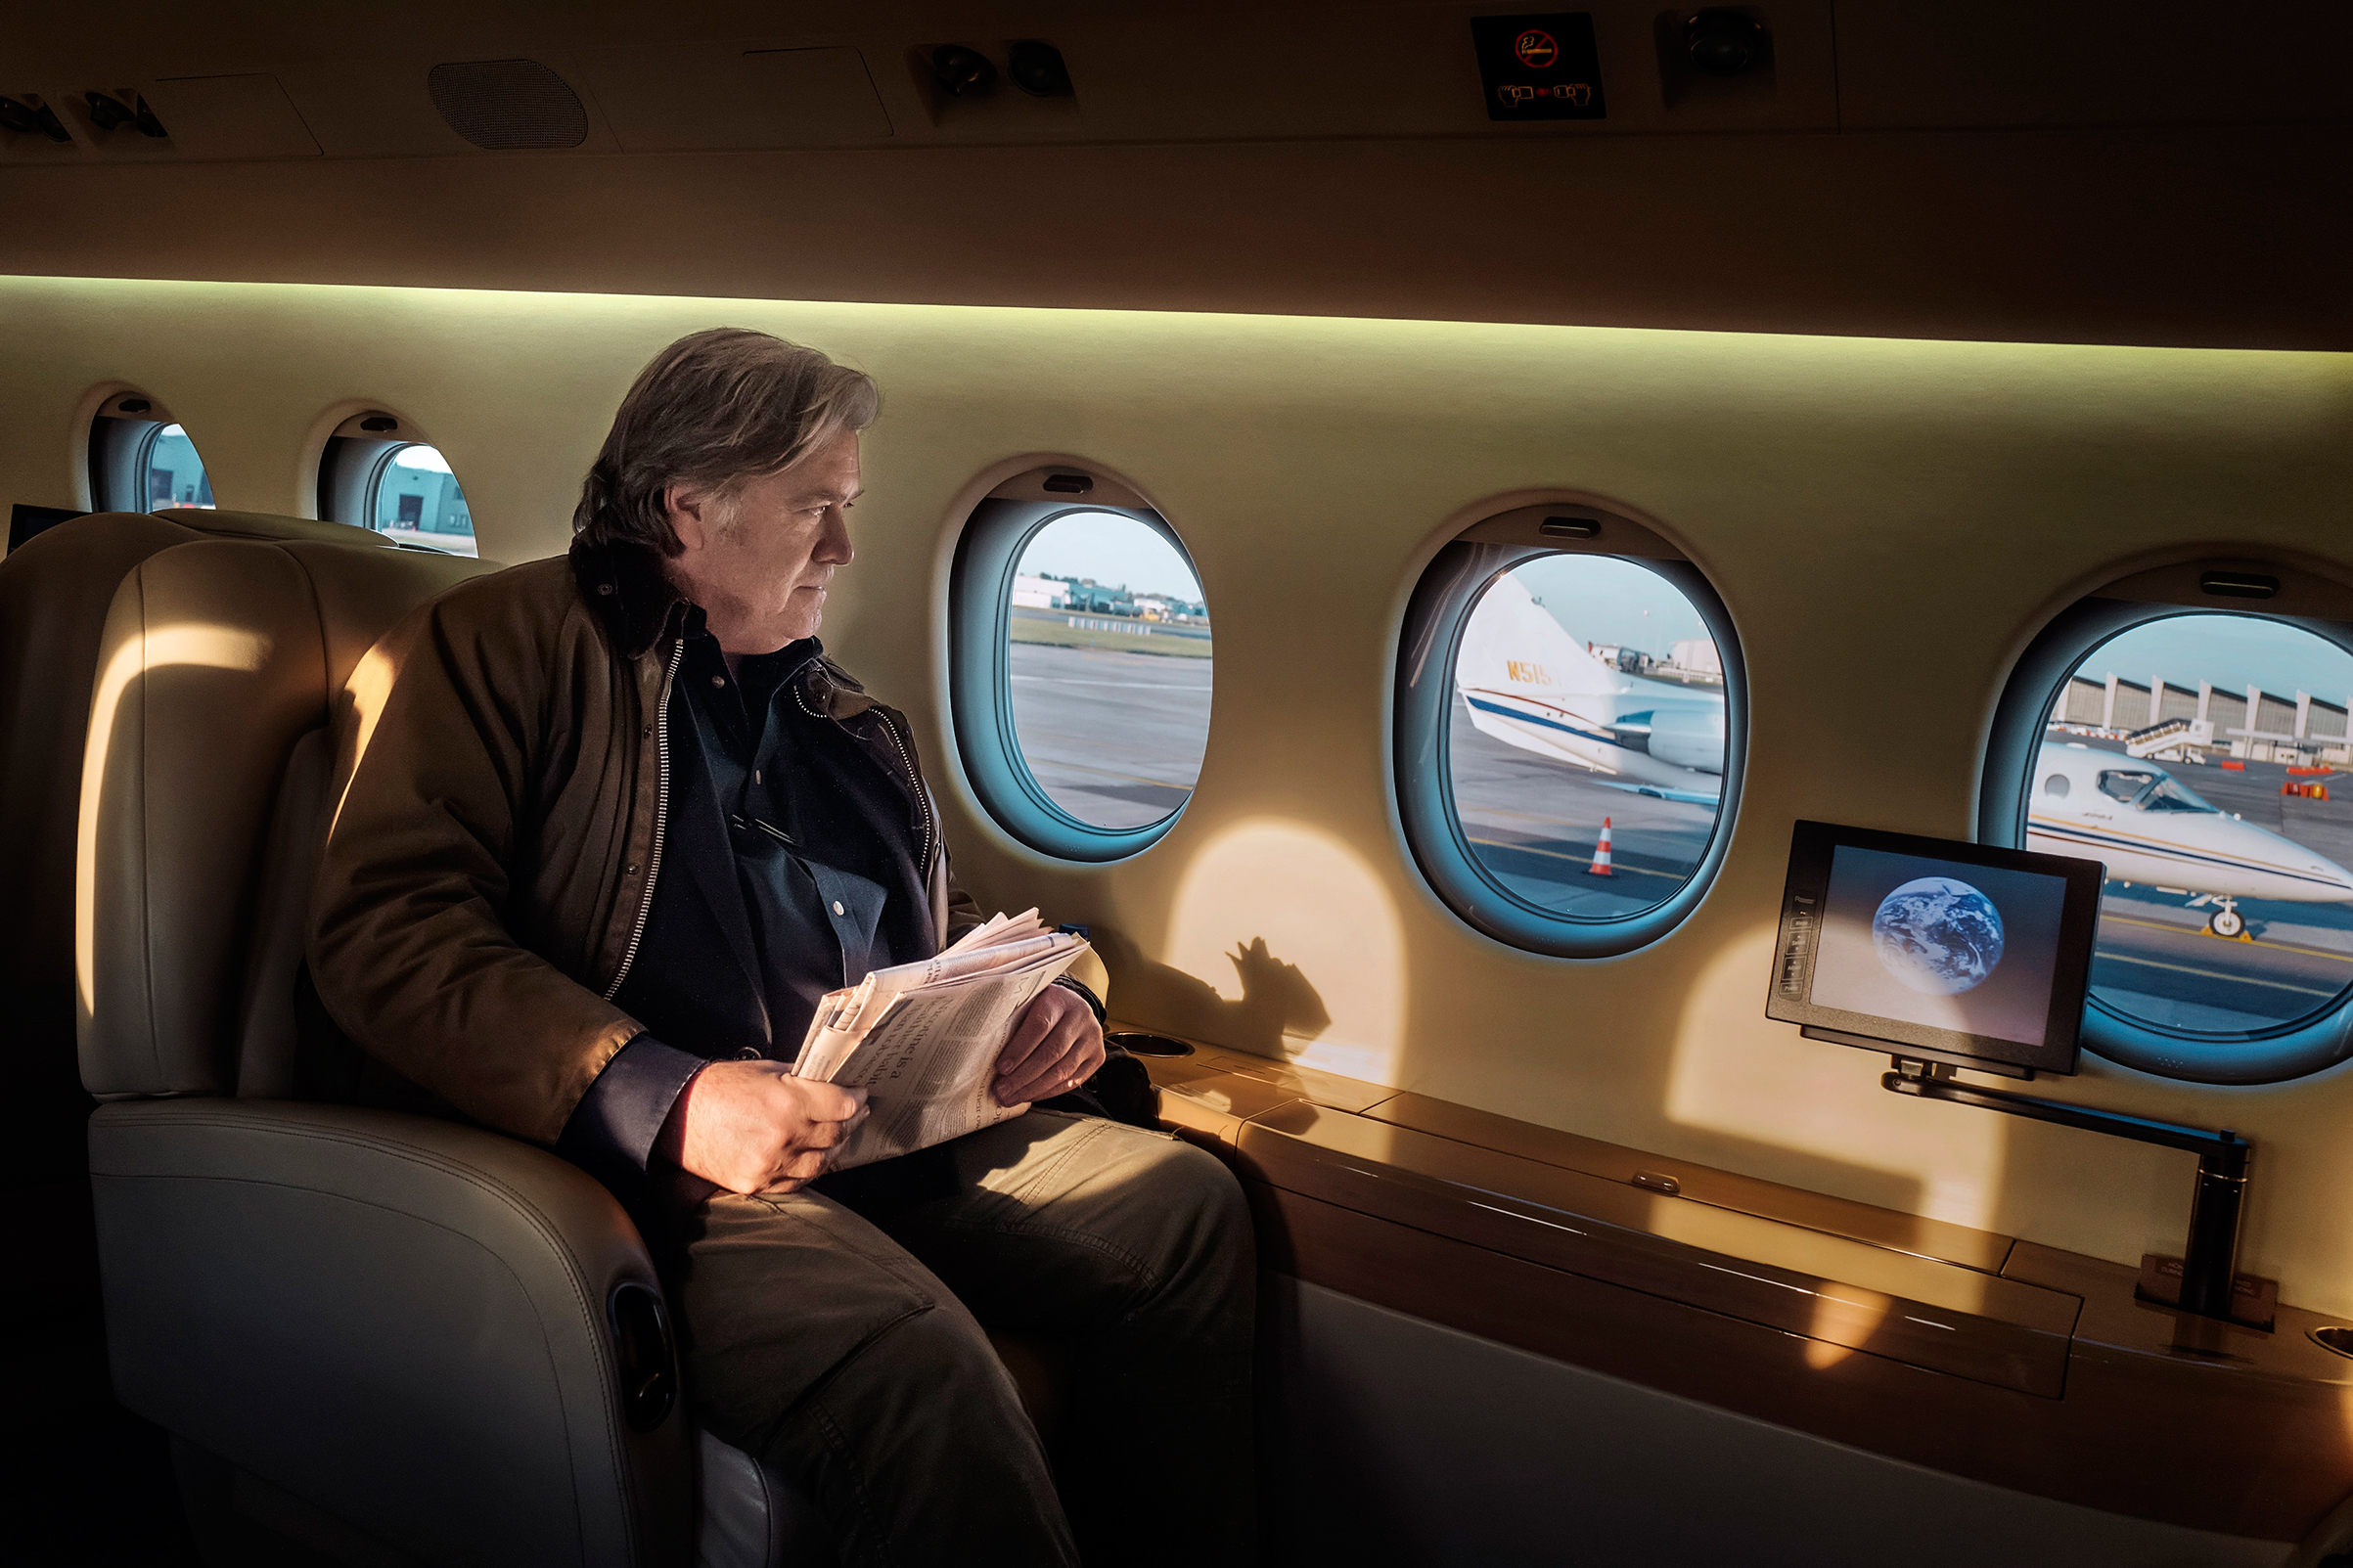 Ex–White House chief strategist Bannon on a rented private plane in Brussels heading to London (Cédric Gerbehaye—MAPS for TIME)